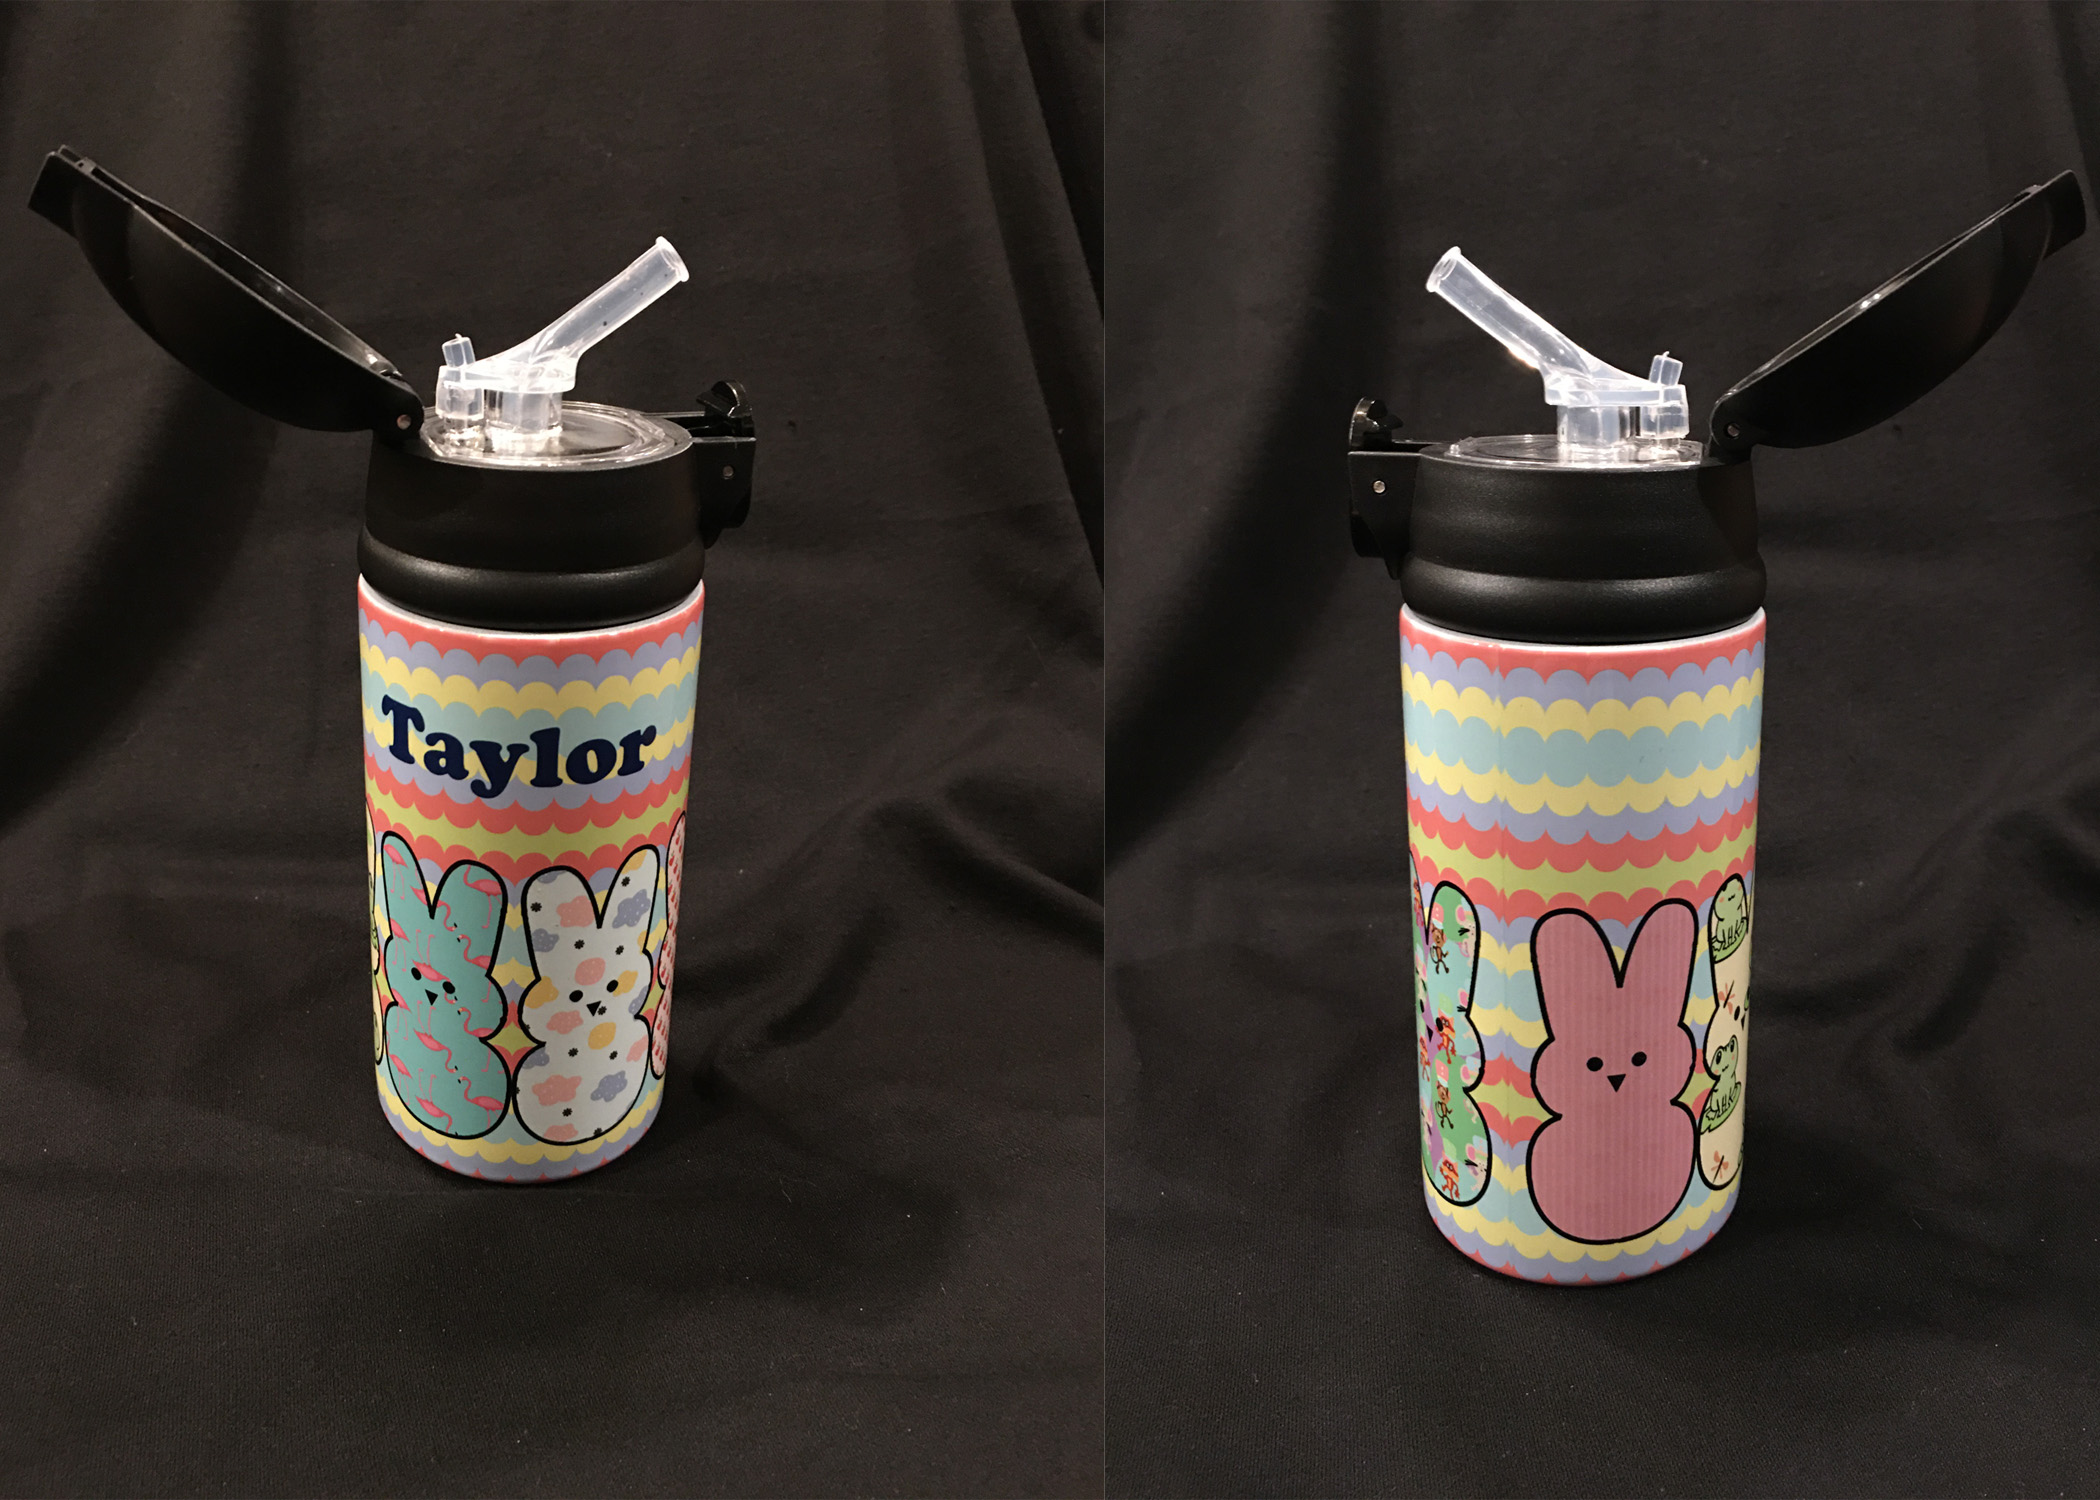 Bunnies Everywhere made with sublimation printing